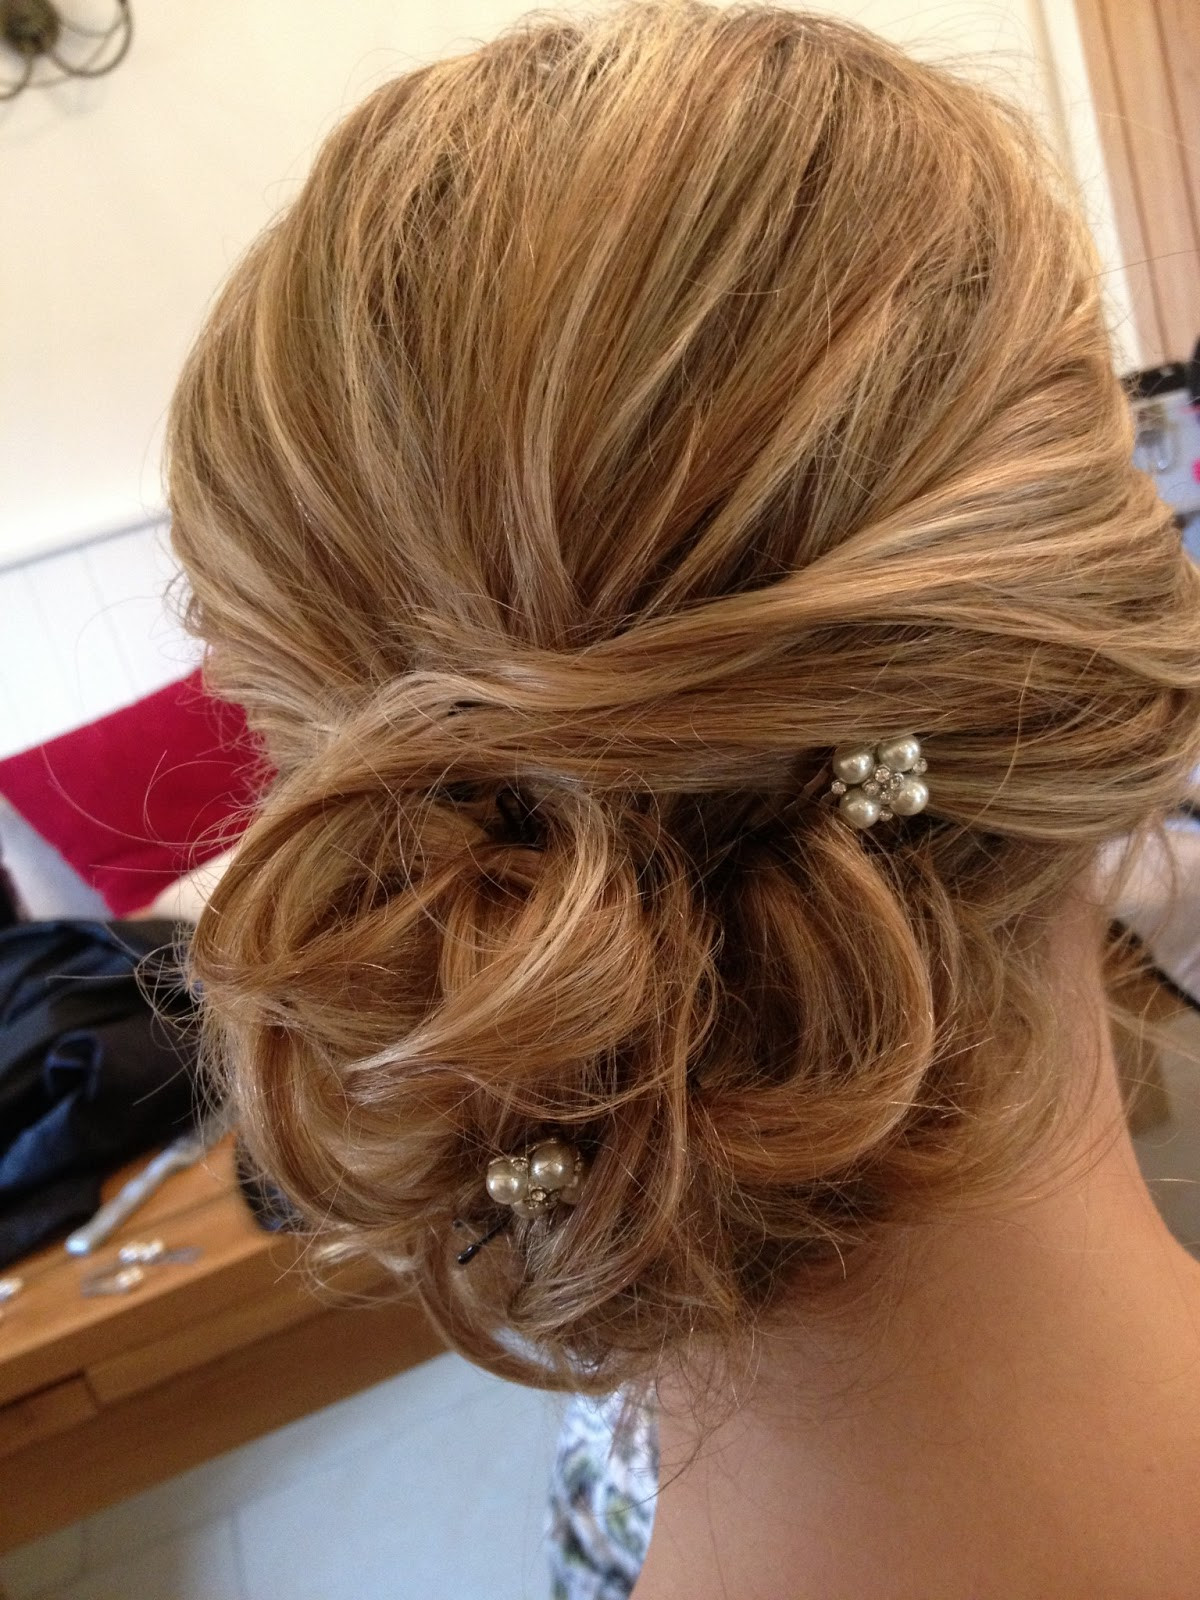 Side Buns Hairstyles For Weddings
 Kingscote Barn Wedding Hair Styling for Frances